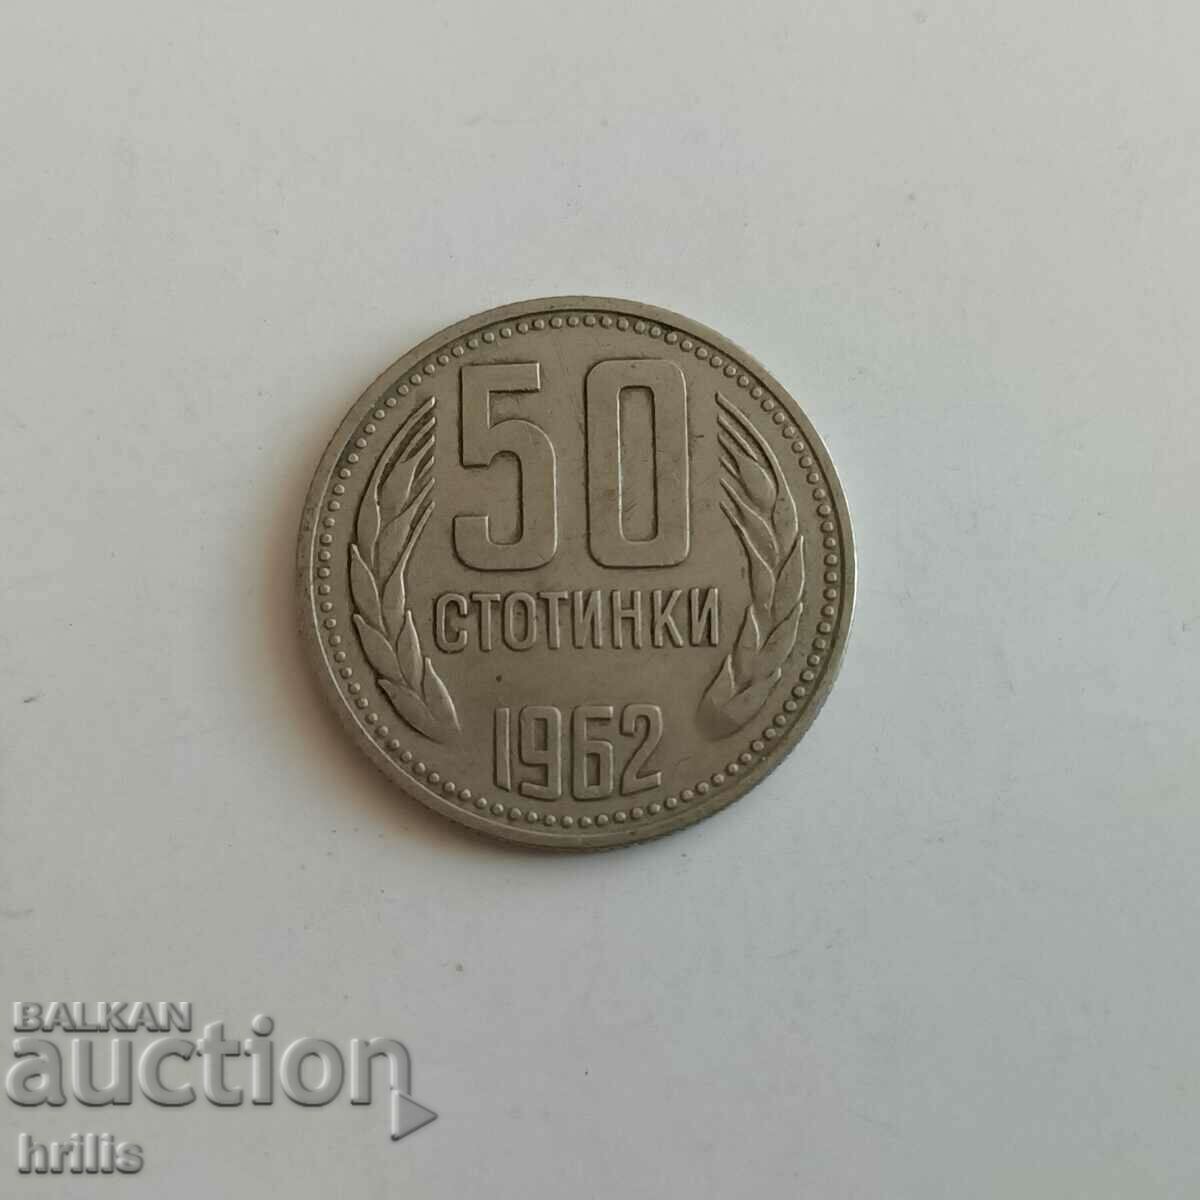 50 CENTS 1962